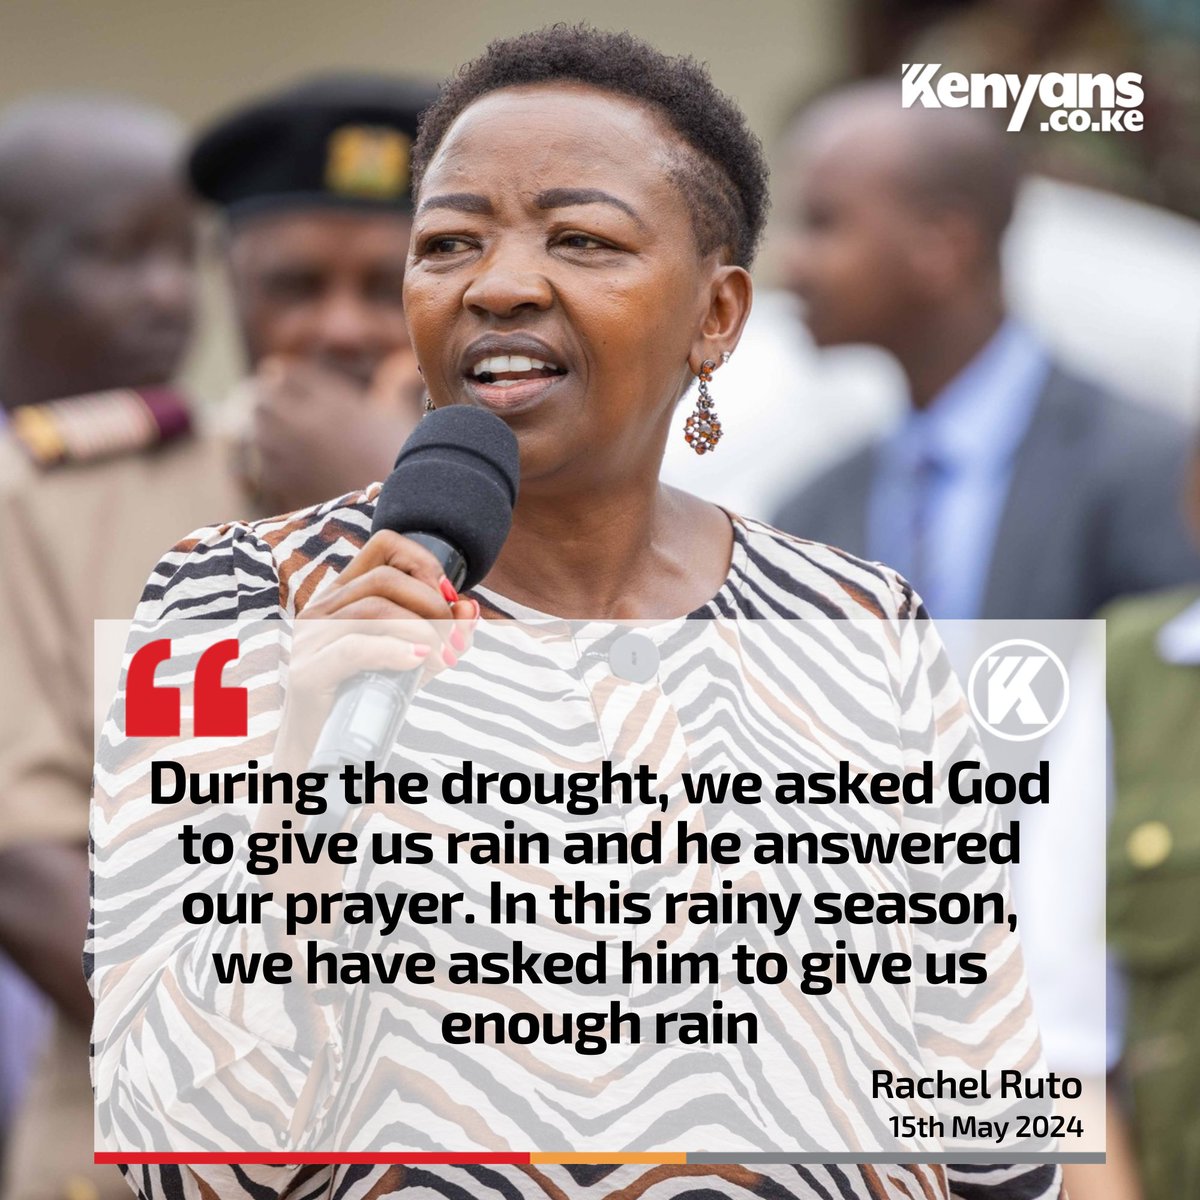 During the drought, we asked God to give us rain and he answered our prayer - First Lady Rachel Ruto